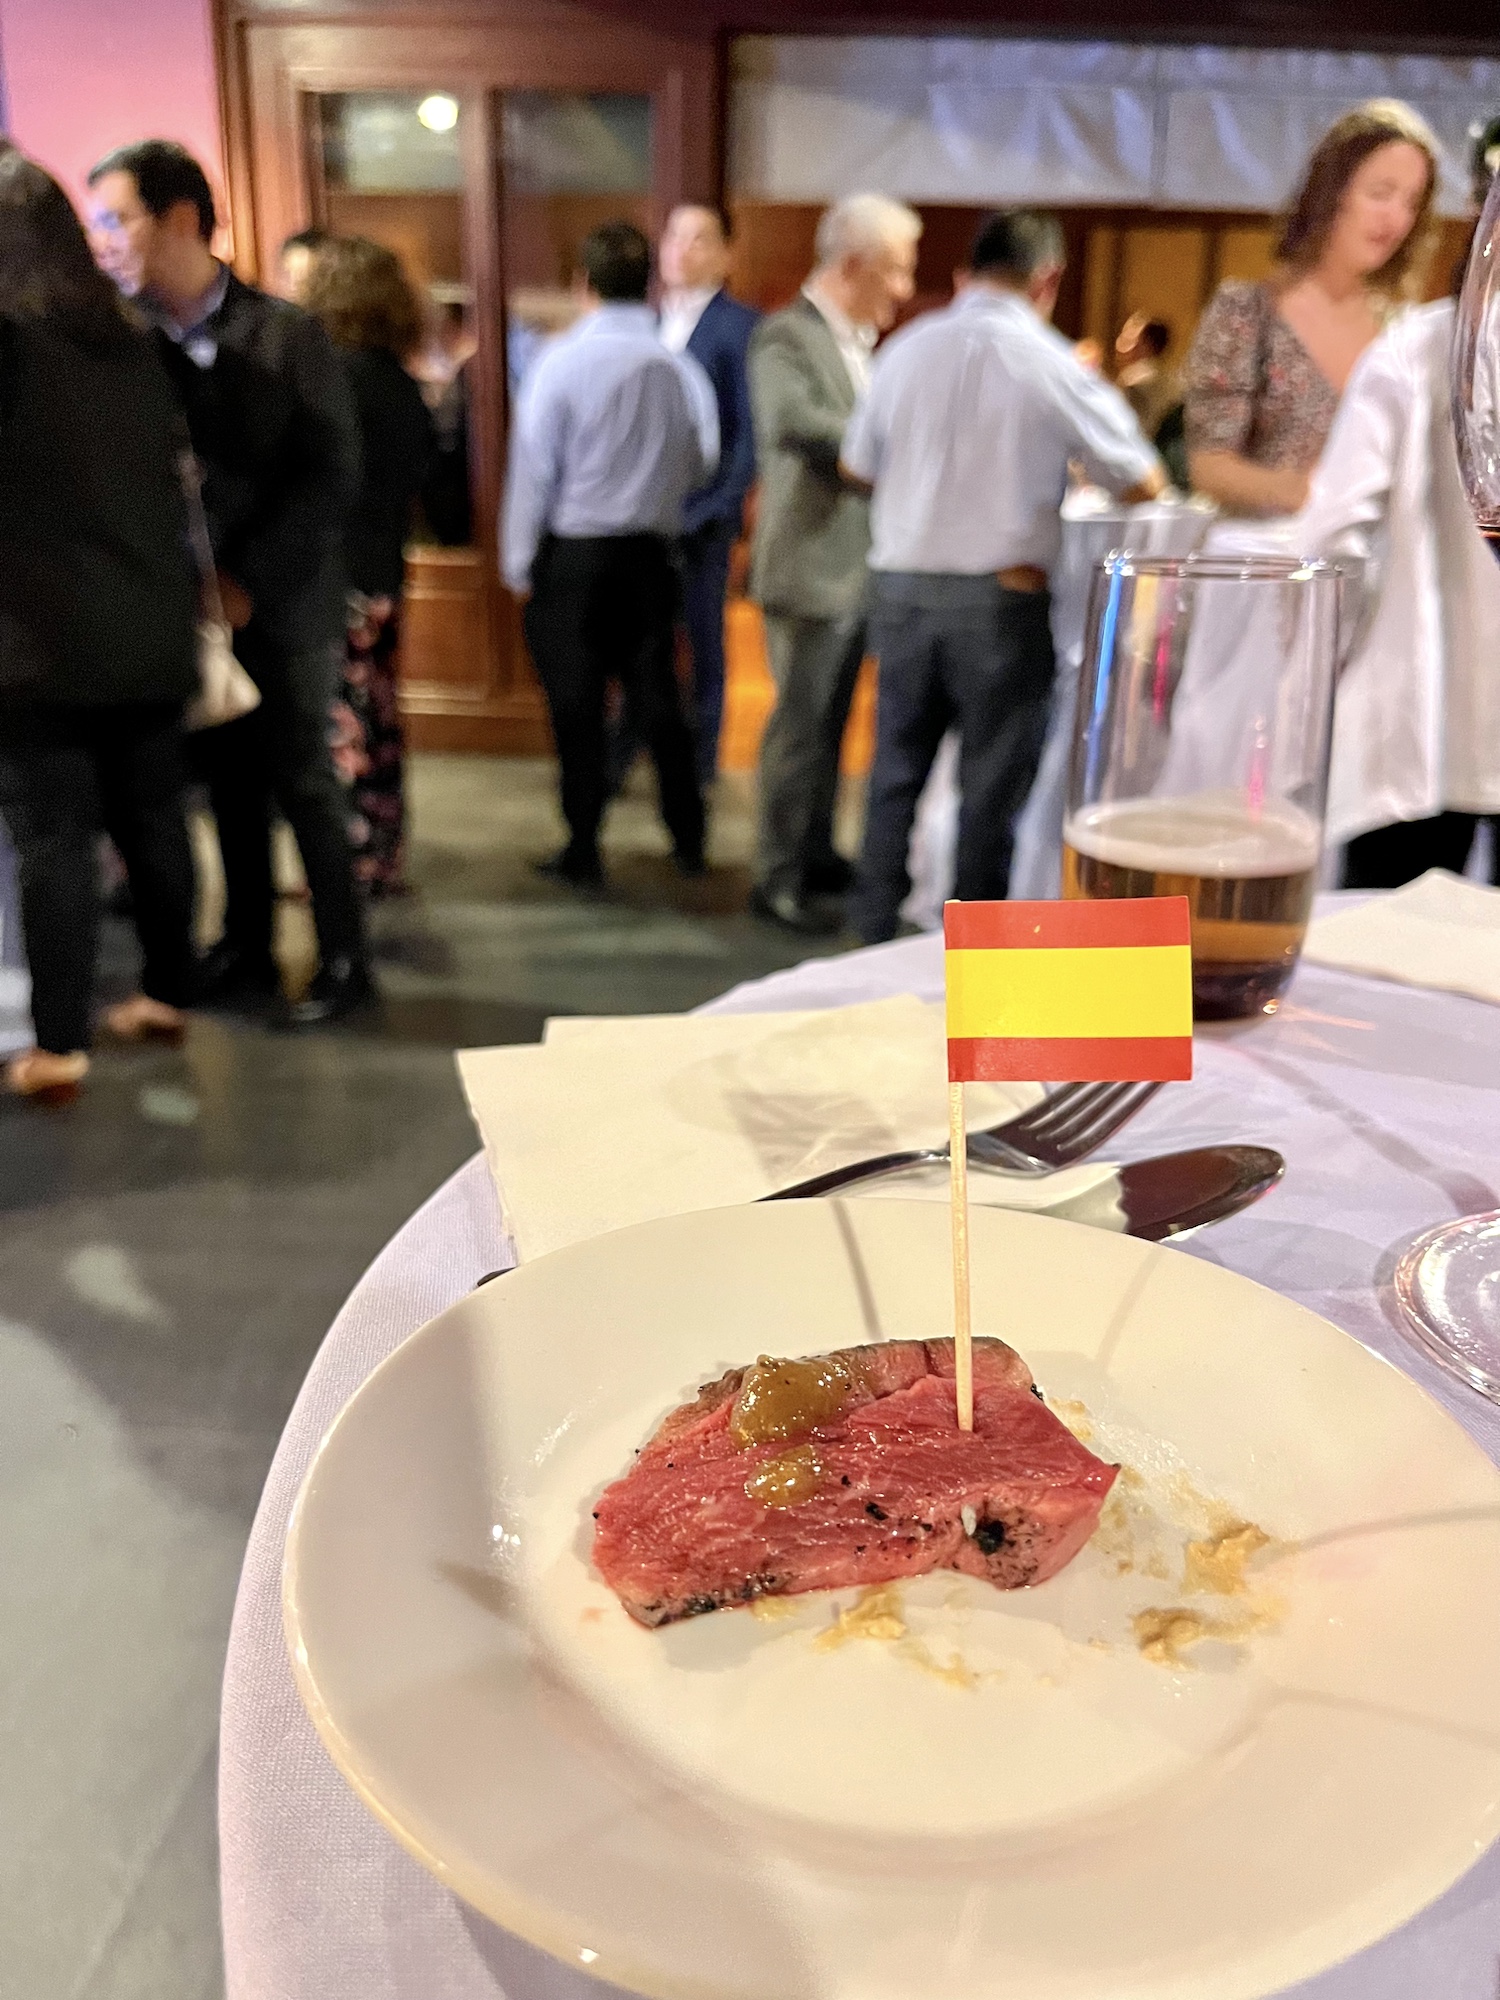 A closer look at the juicy, low-fat, and rose-colored Spanish beef